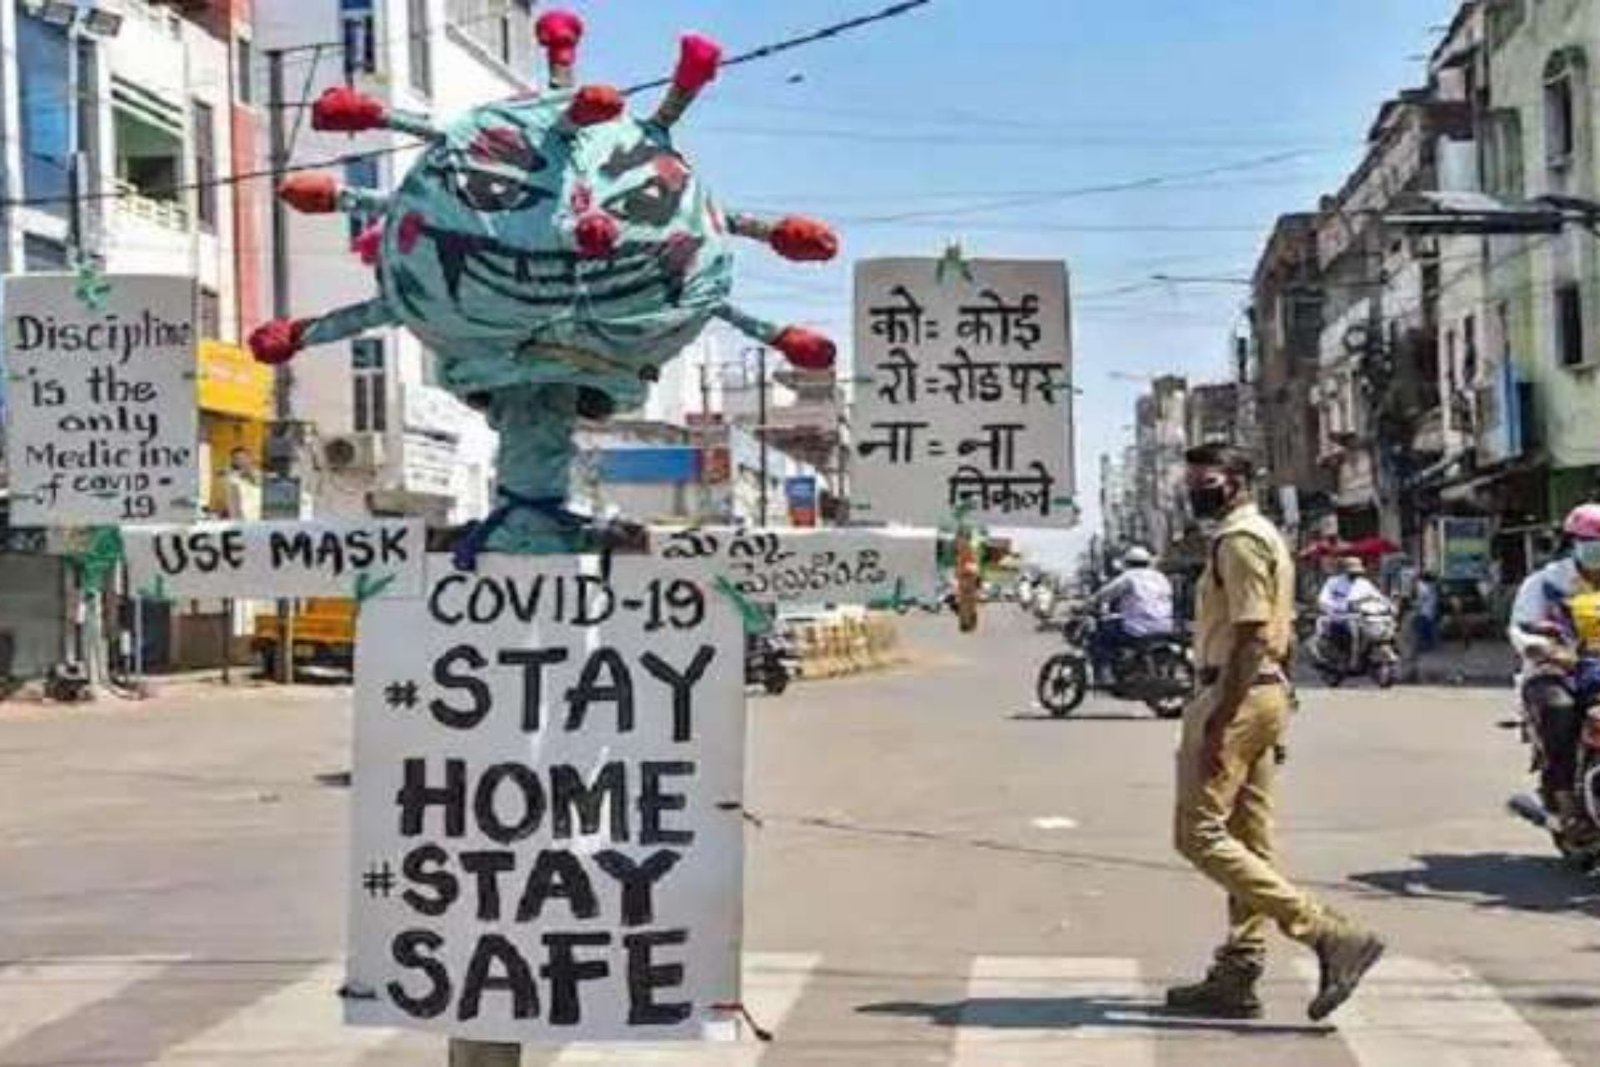 After June 21, Karnataka Lockdown curbs Will Be Relaxed Even Further